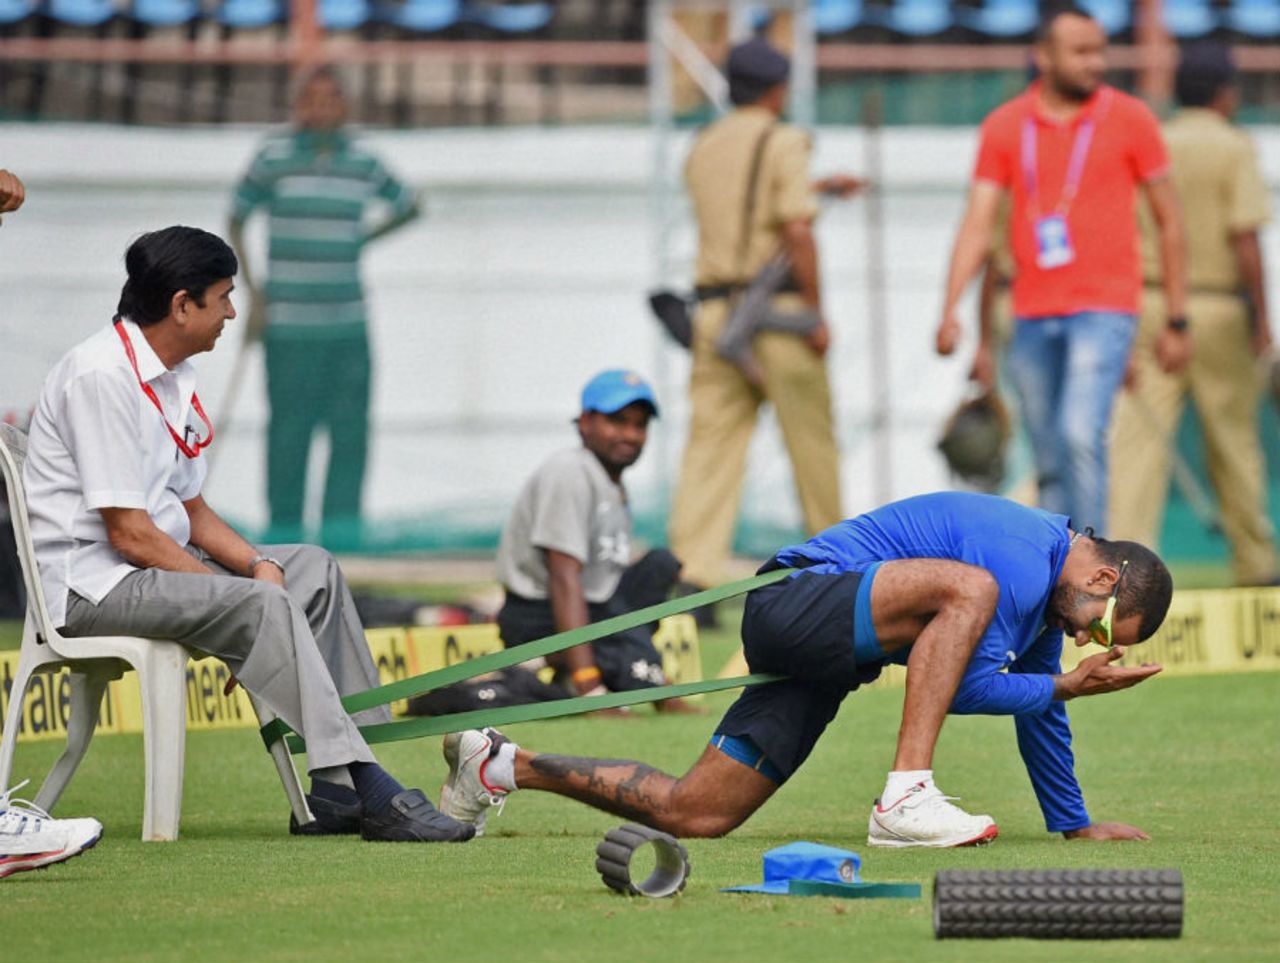 Wonder what happened to that chair: Shikhar Dhawan stretches during training, Rajkot, October 17, 2015